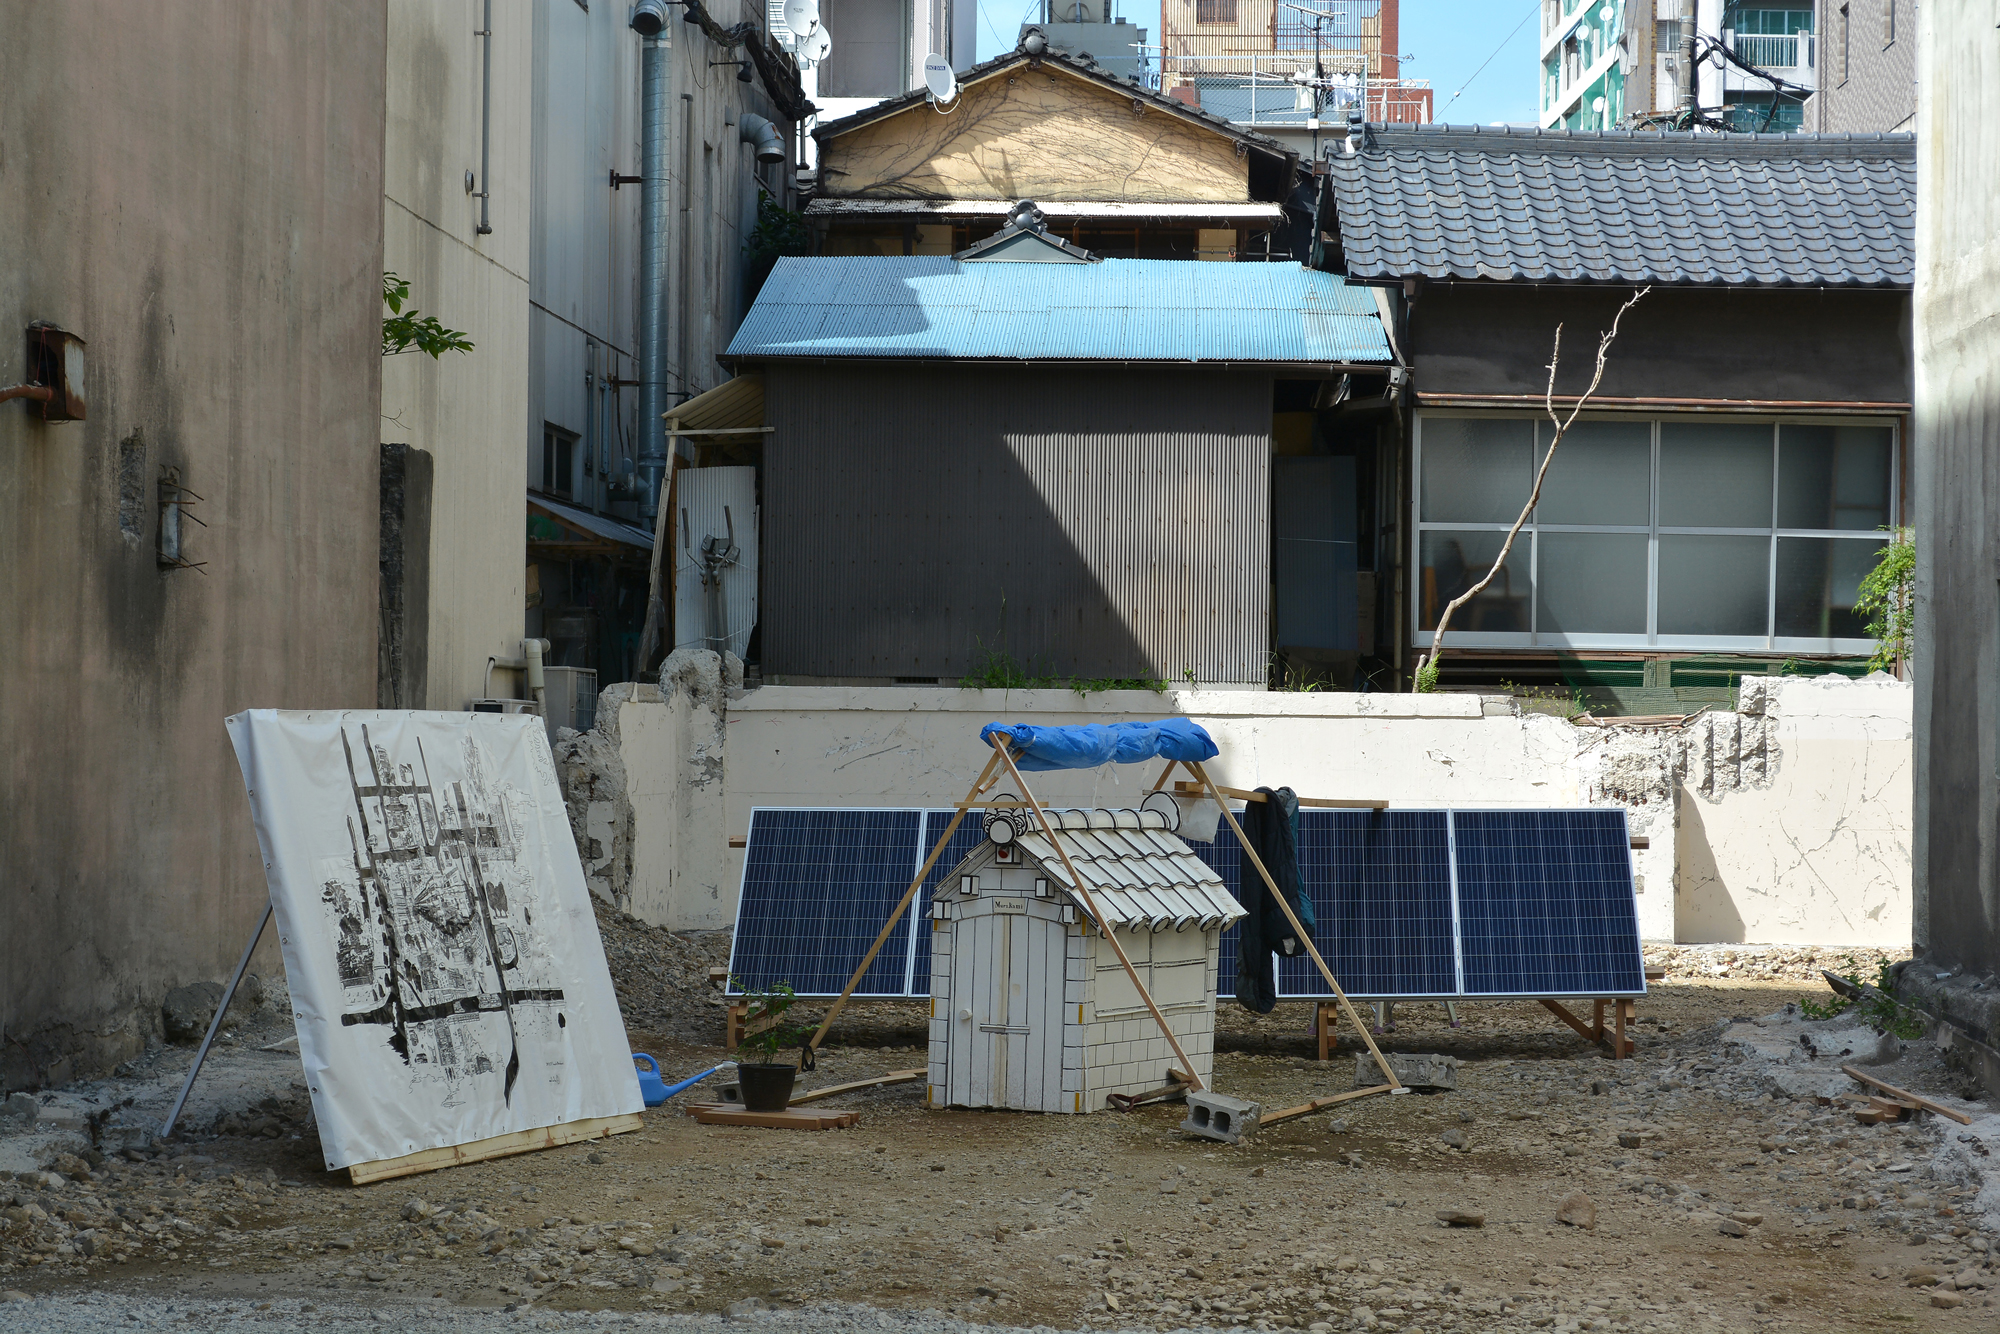 ¬Japanese artist Satoshi Murakami’s work titled ‘Migratory Life’ showcasing alternative ways of living | Portable Styrofoam ‘house’ in front of houses on a dirt patch | Japanese house | Tokyo | Japanese art | Japanese artists | Written by Grace Lovell and Yoshi Tsujimura Photography by Yoshi Tsujimura | edited by Sophie Rzepecky